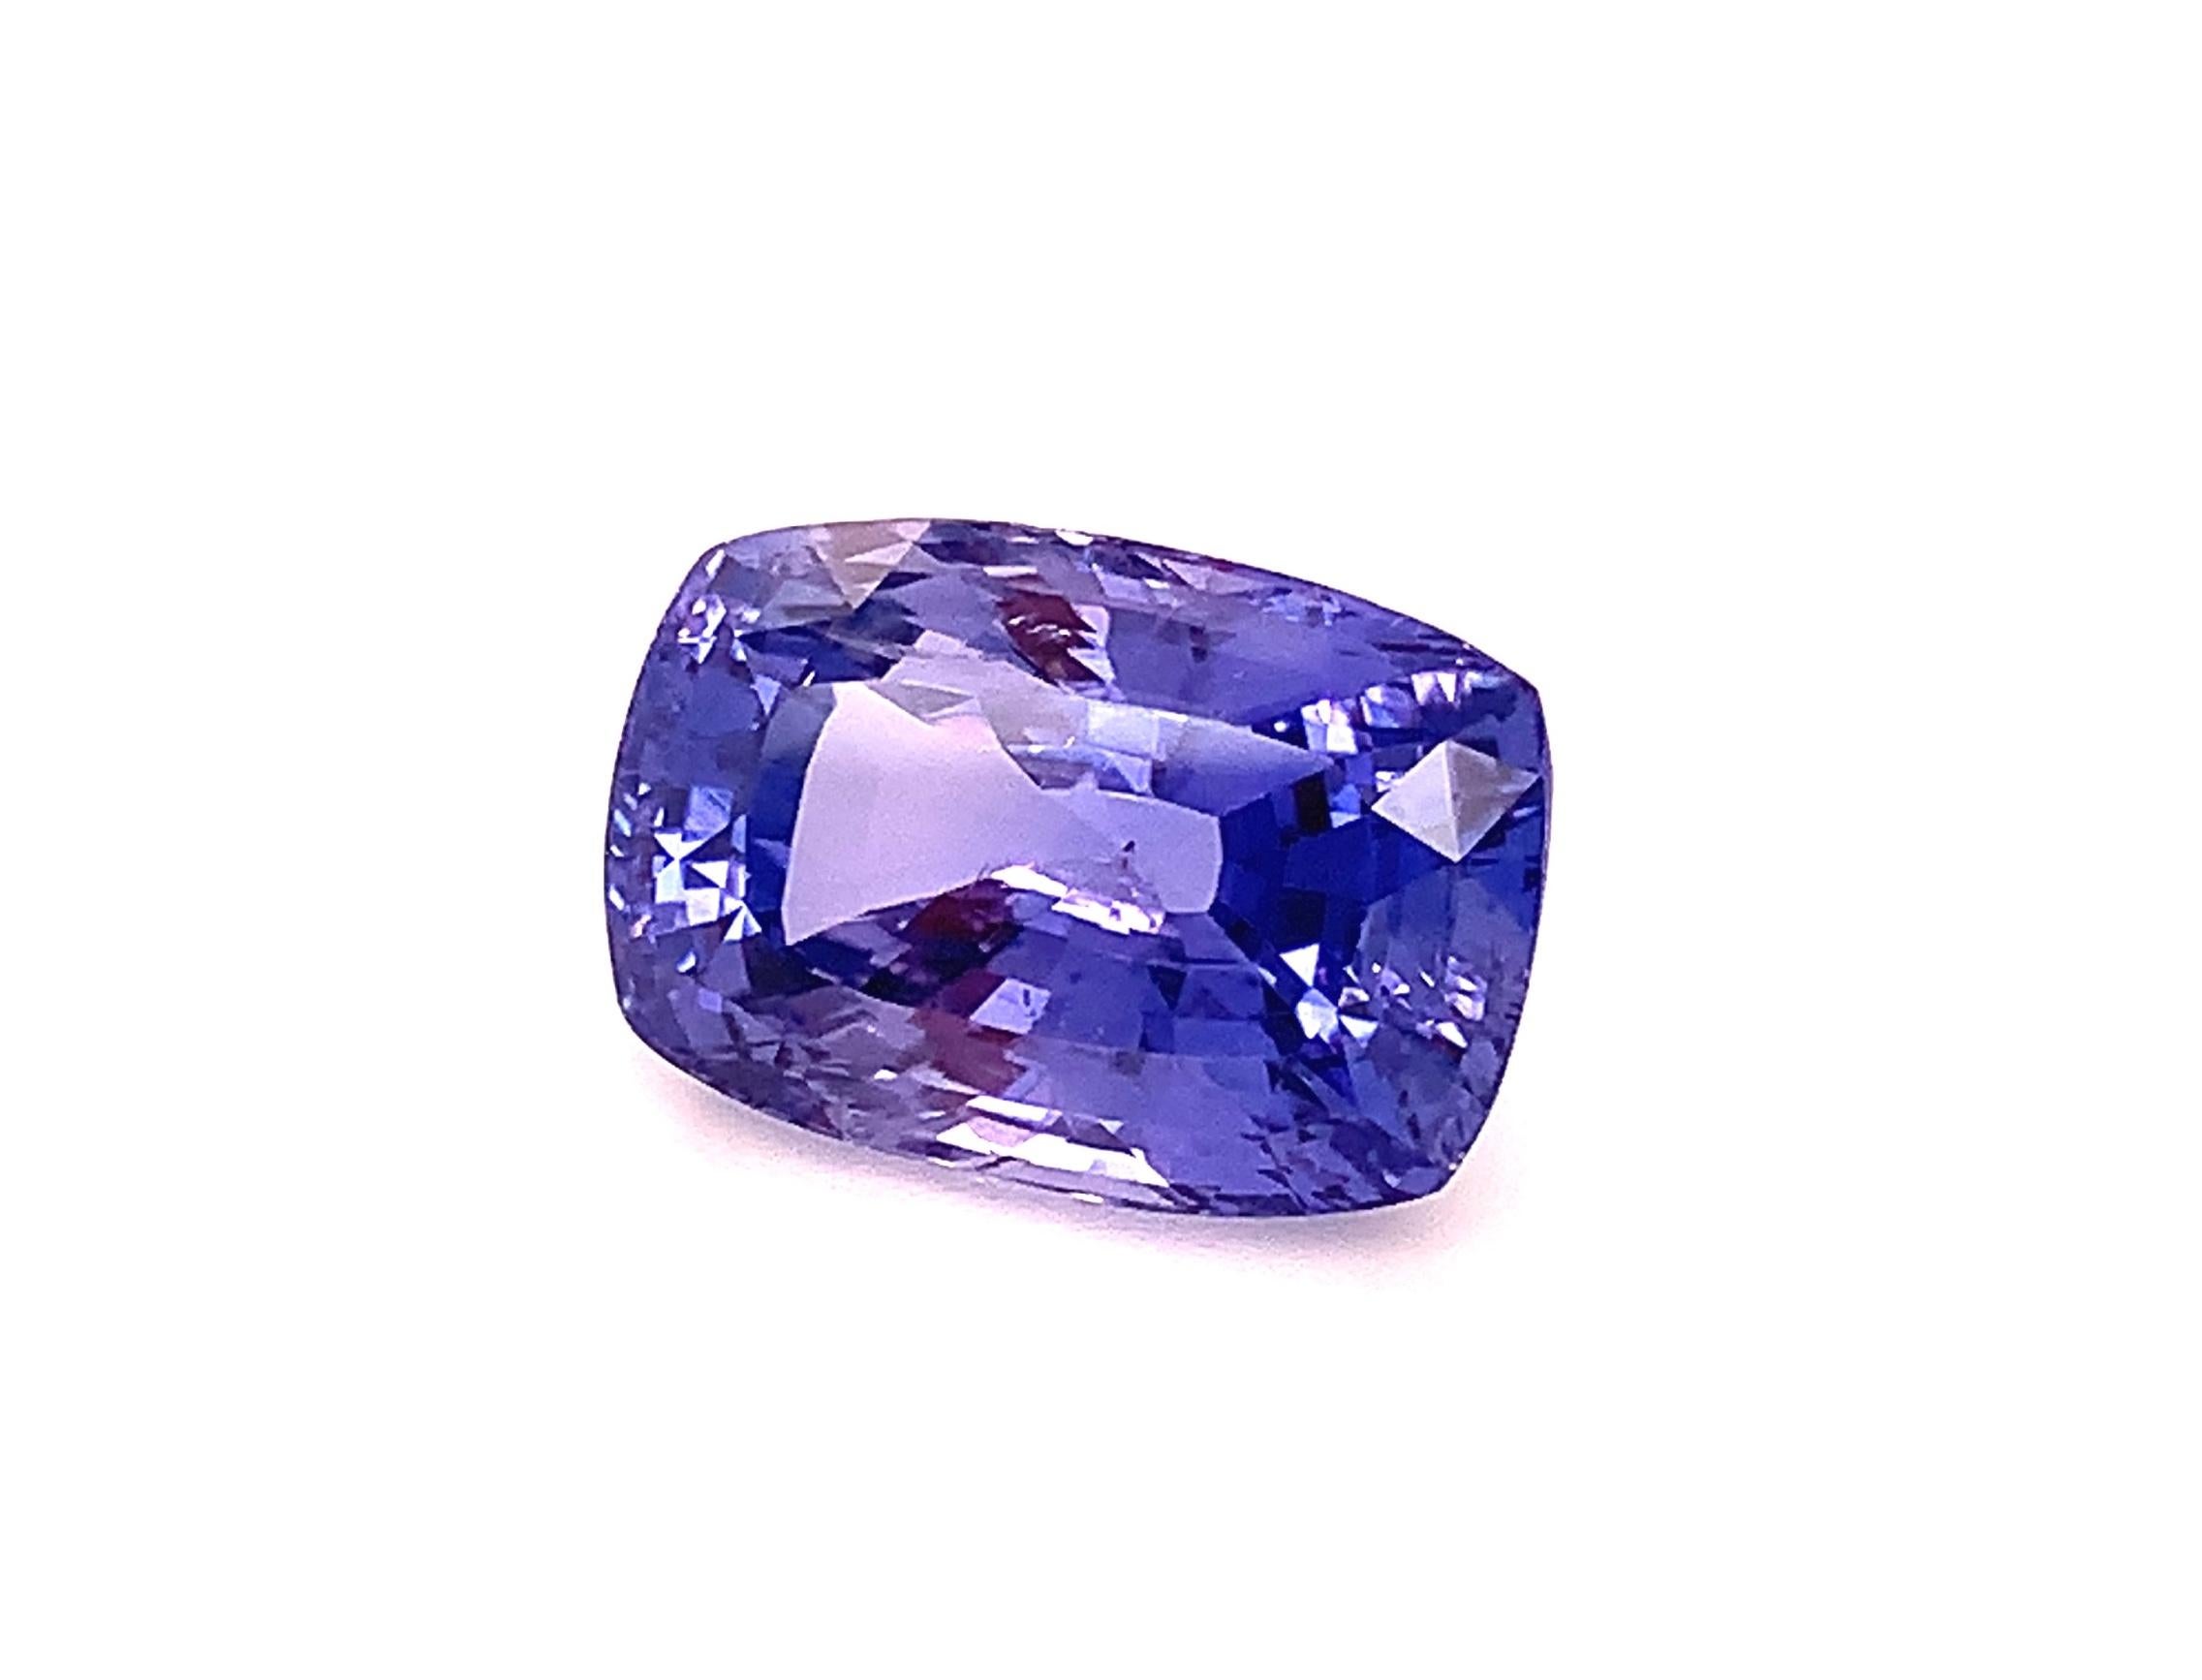 Unheated 29.45 Carat Blue Violet Sapphire, Loose Gemstone, GIA Certified 4